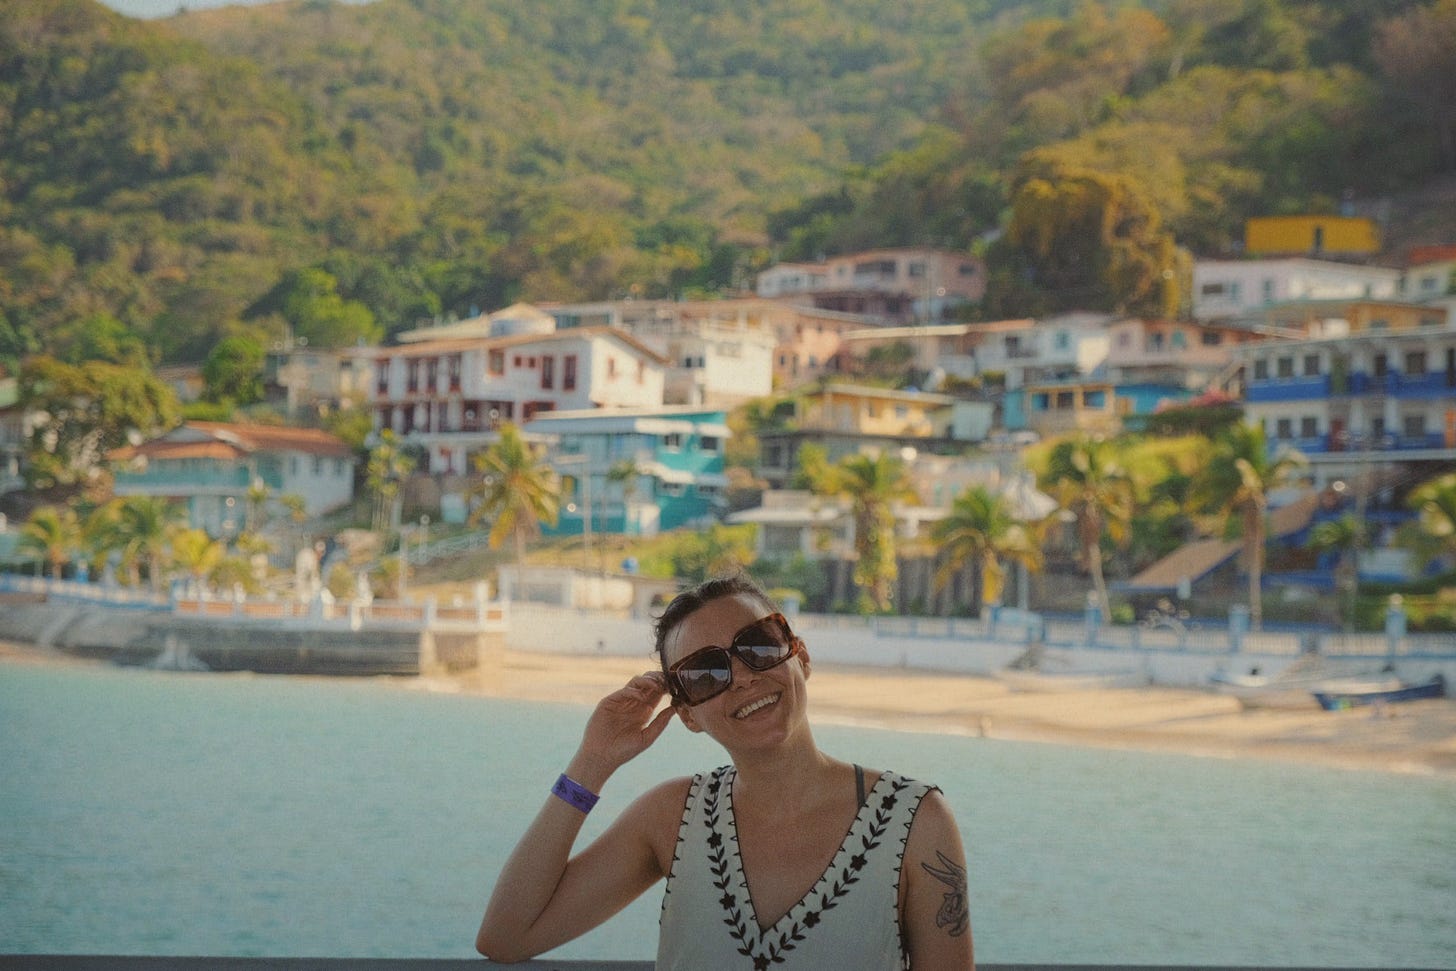 Leah in sunglasses and a sundress smiling at the camera, with the sun shining on the beach, boats, and hotels in the background.